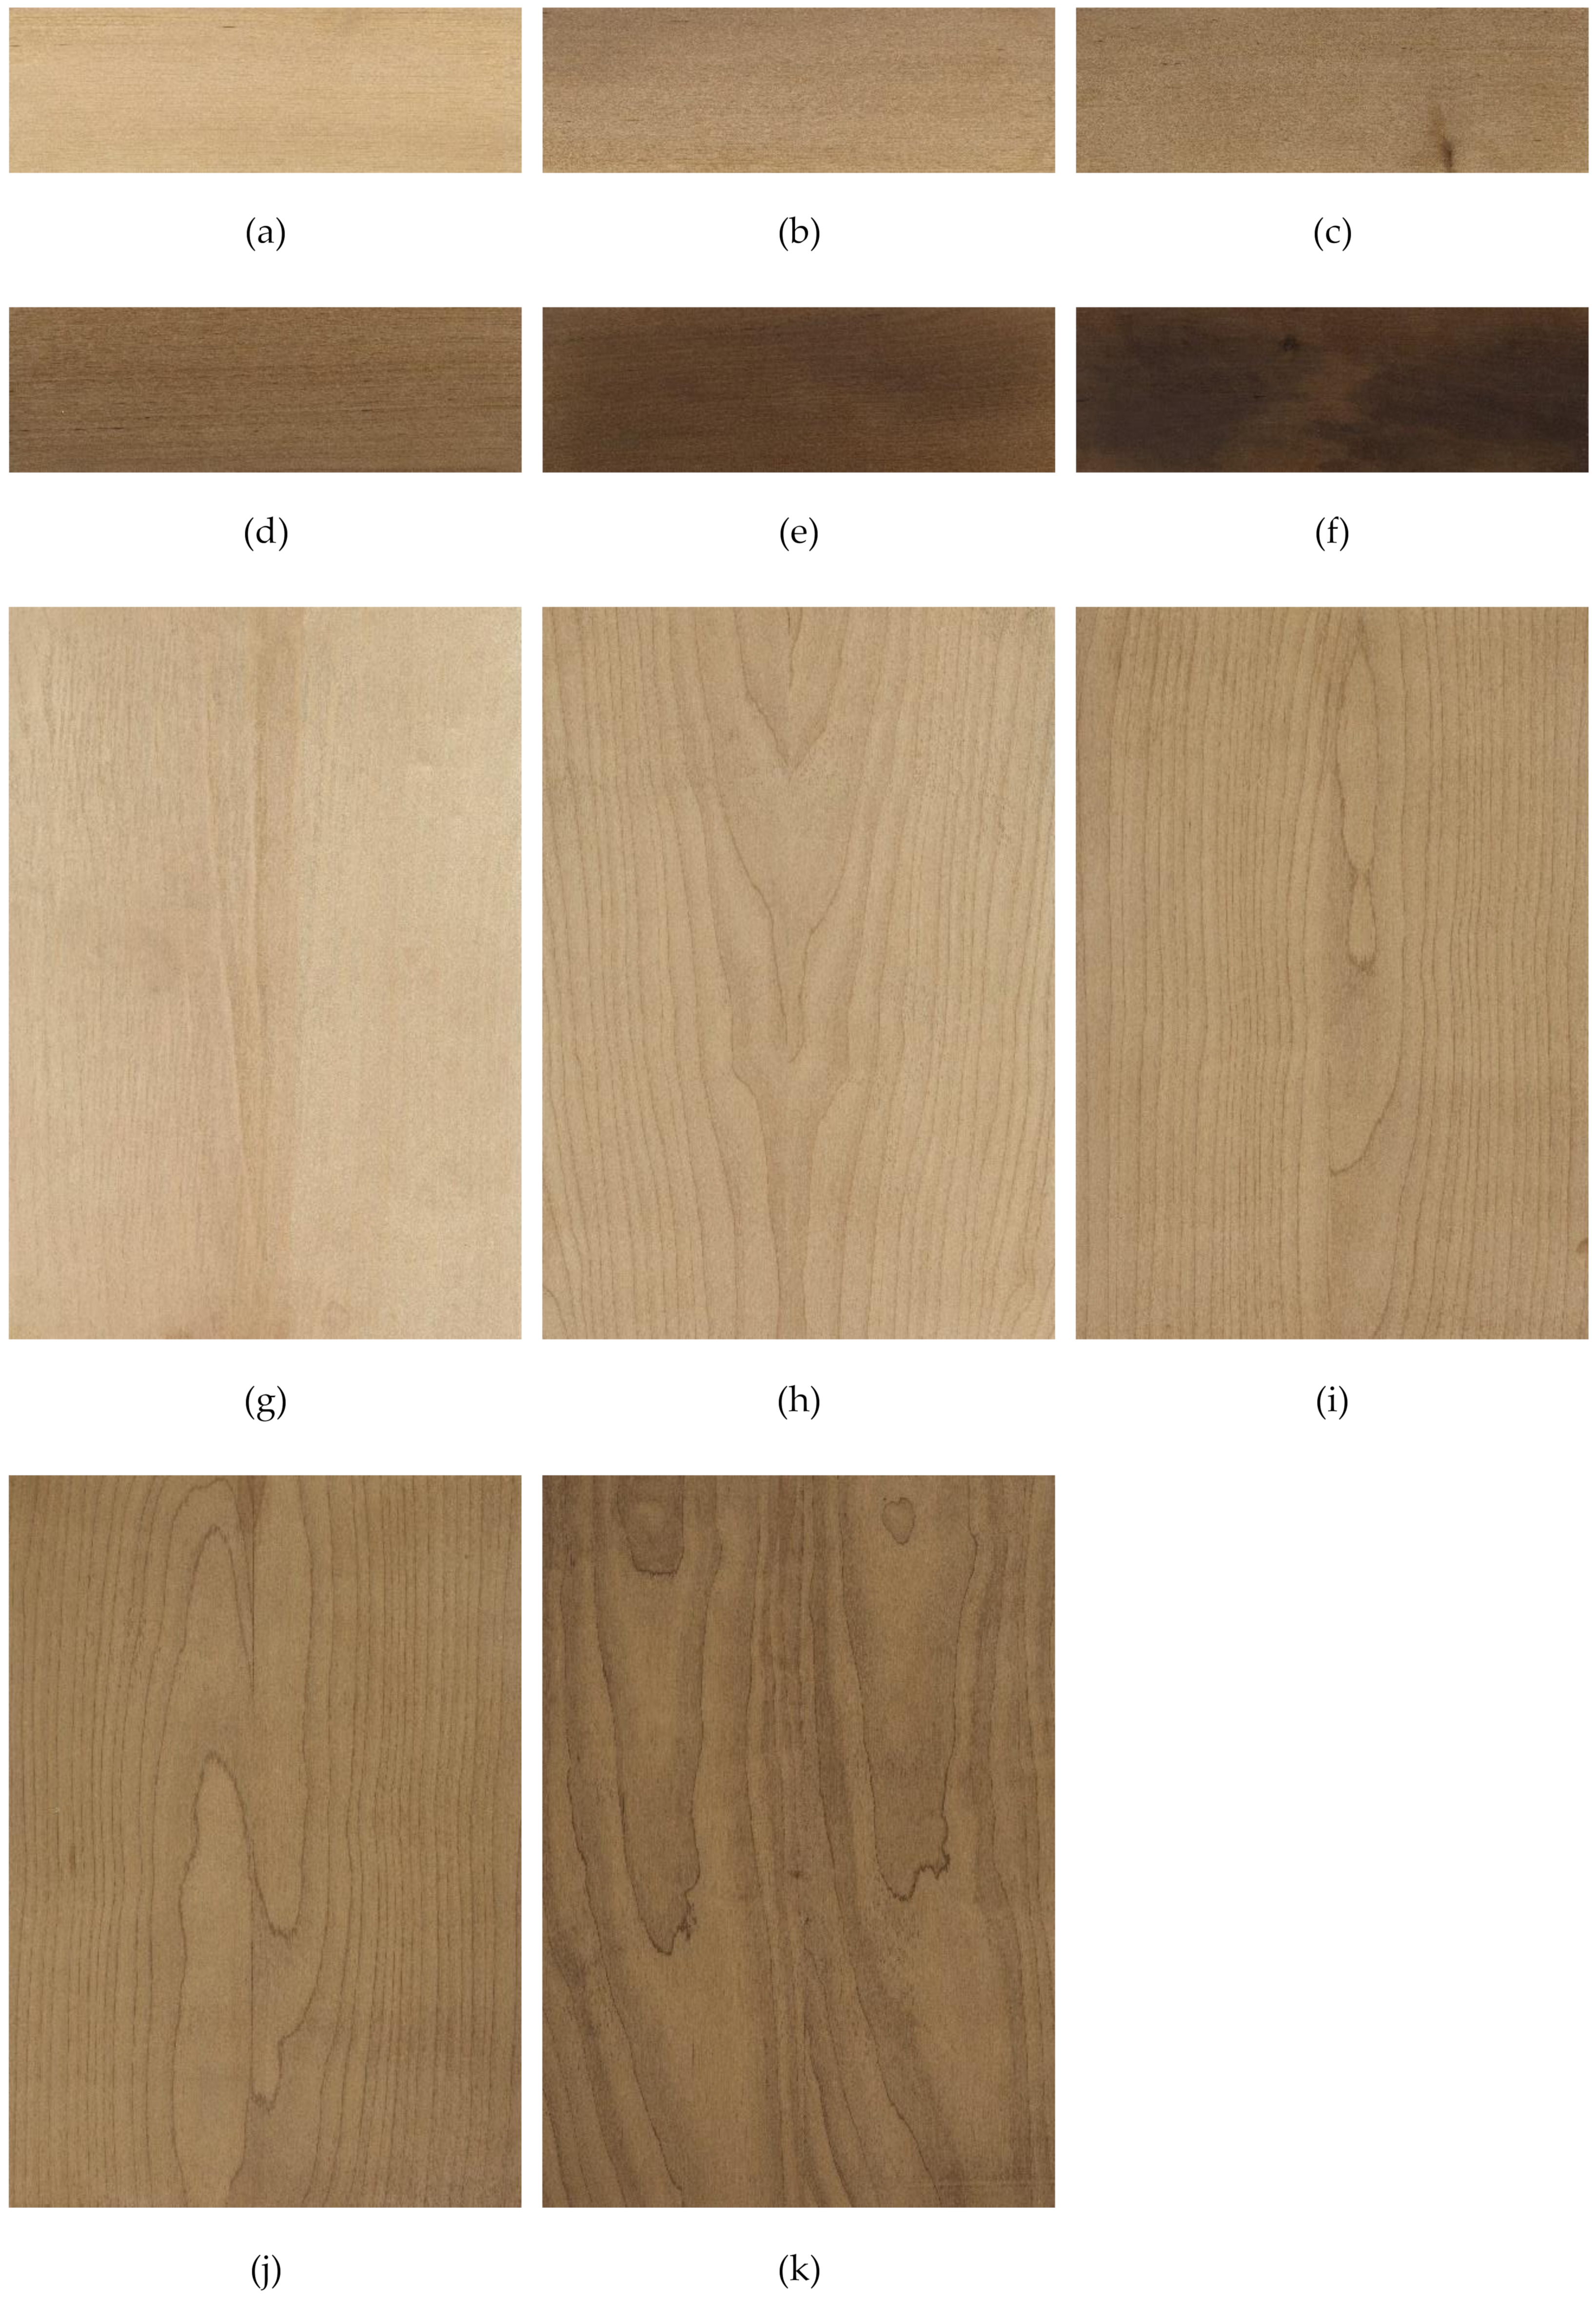 Forests Free Full Text Influence Of Site Conditions And Quality Of Birch Wood On Its Properties And Utilization After Heat Treatment Part Ii Surface Properties And Marketing Evaluation Of The Effect Of